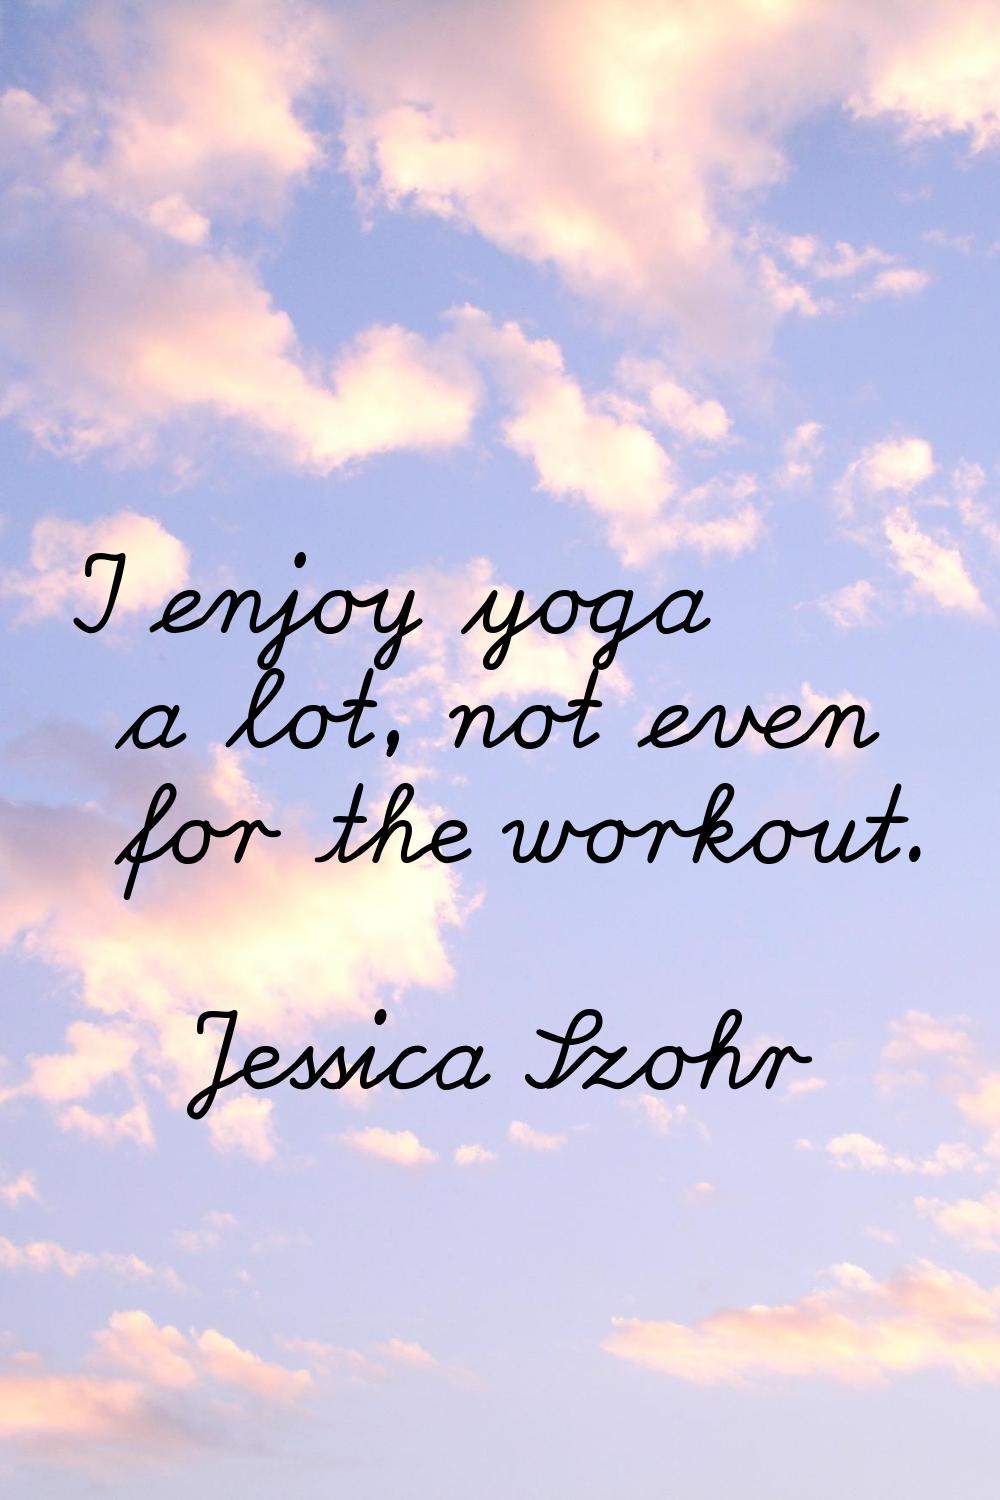 I enjoy yoga a lot, not even for the workout.